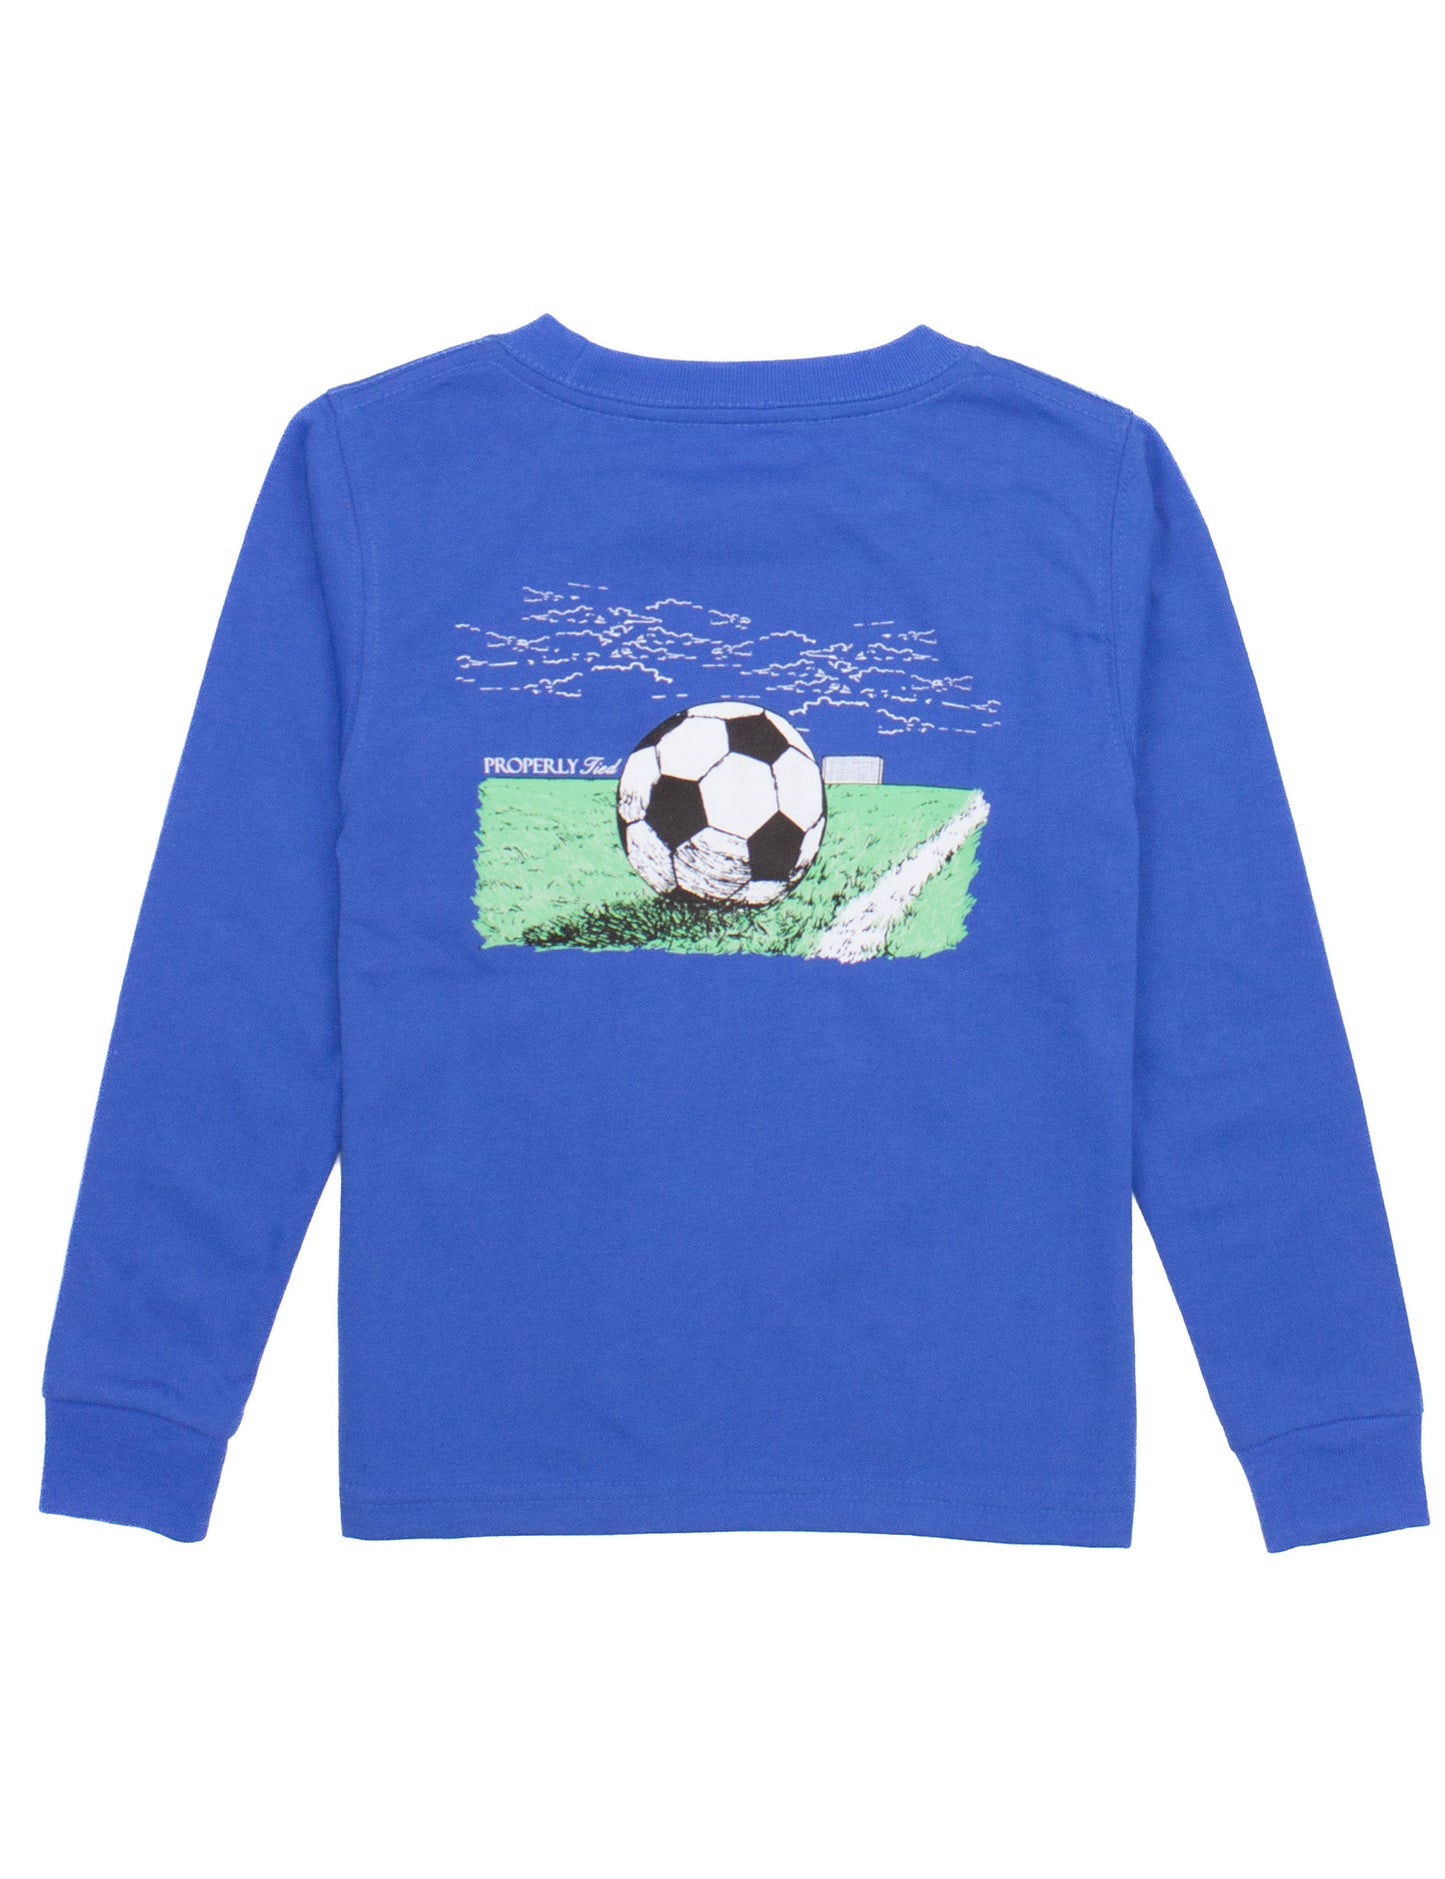 Properly Tied Long Sleeve Soccer